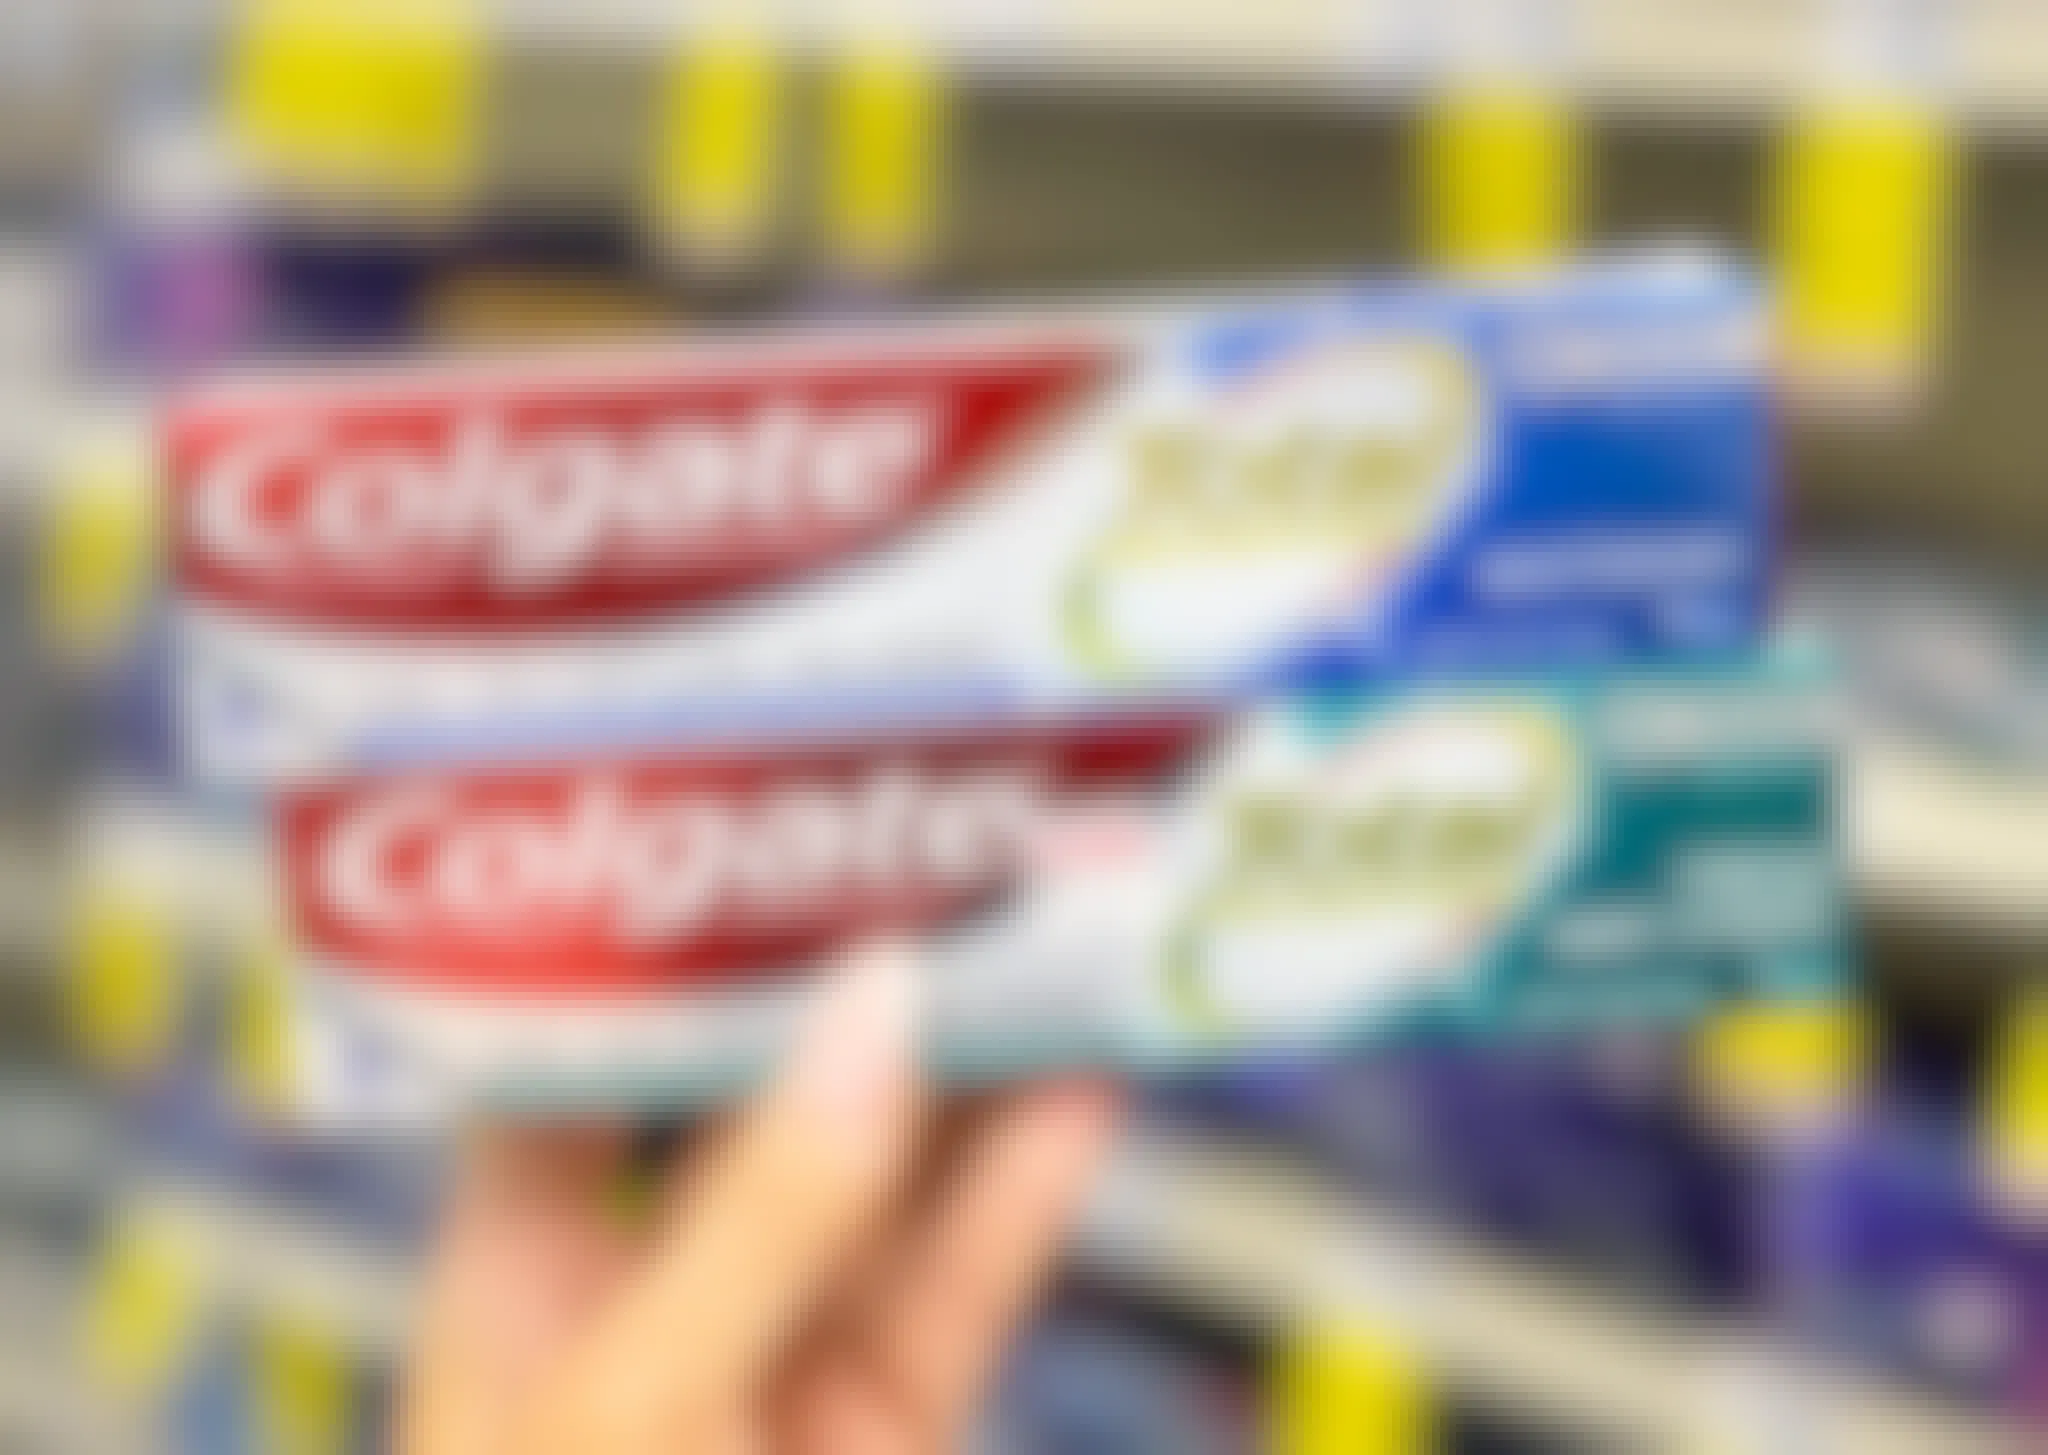 A person's hand holding up two stacked boxes of Colgate Total brand toothpaste in front of a shelf at CVS.